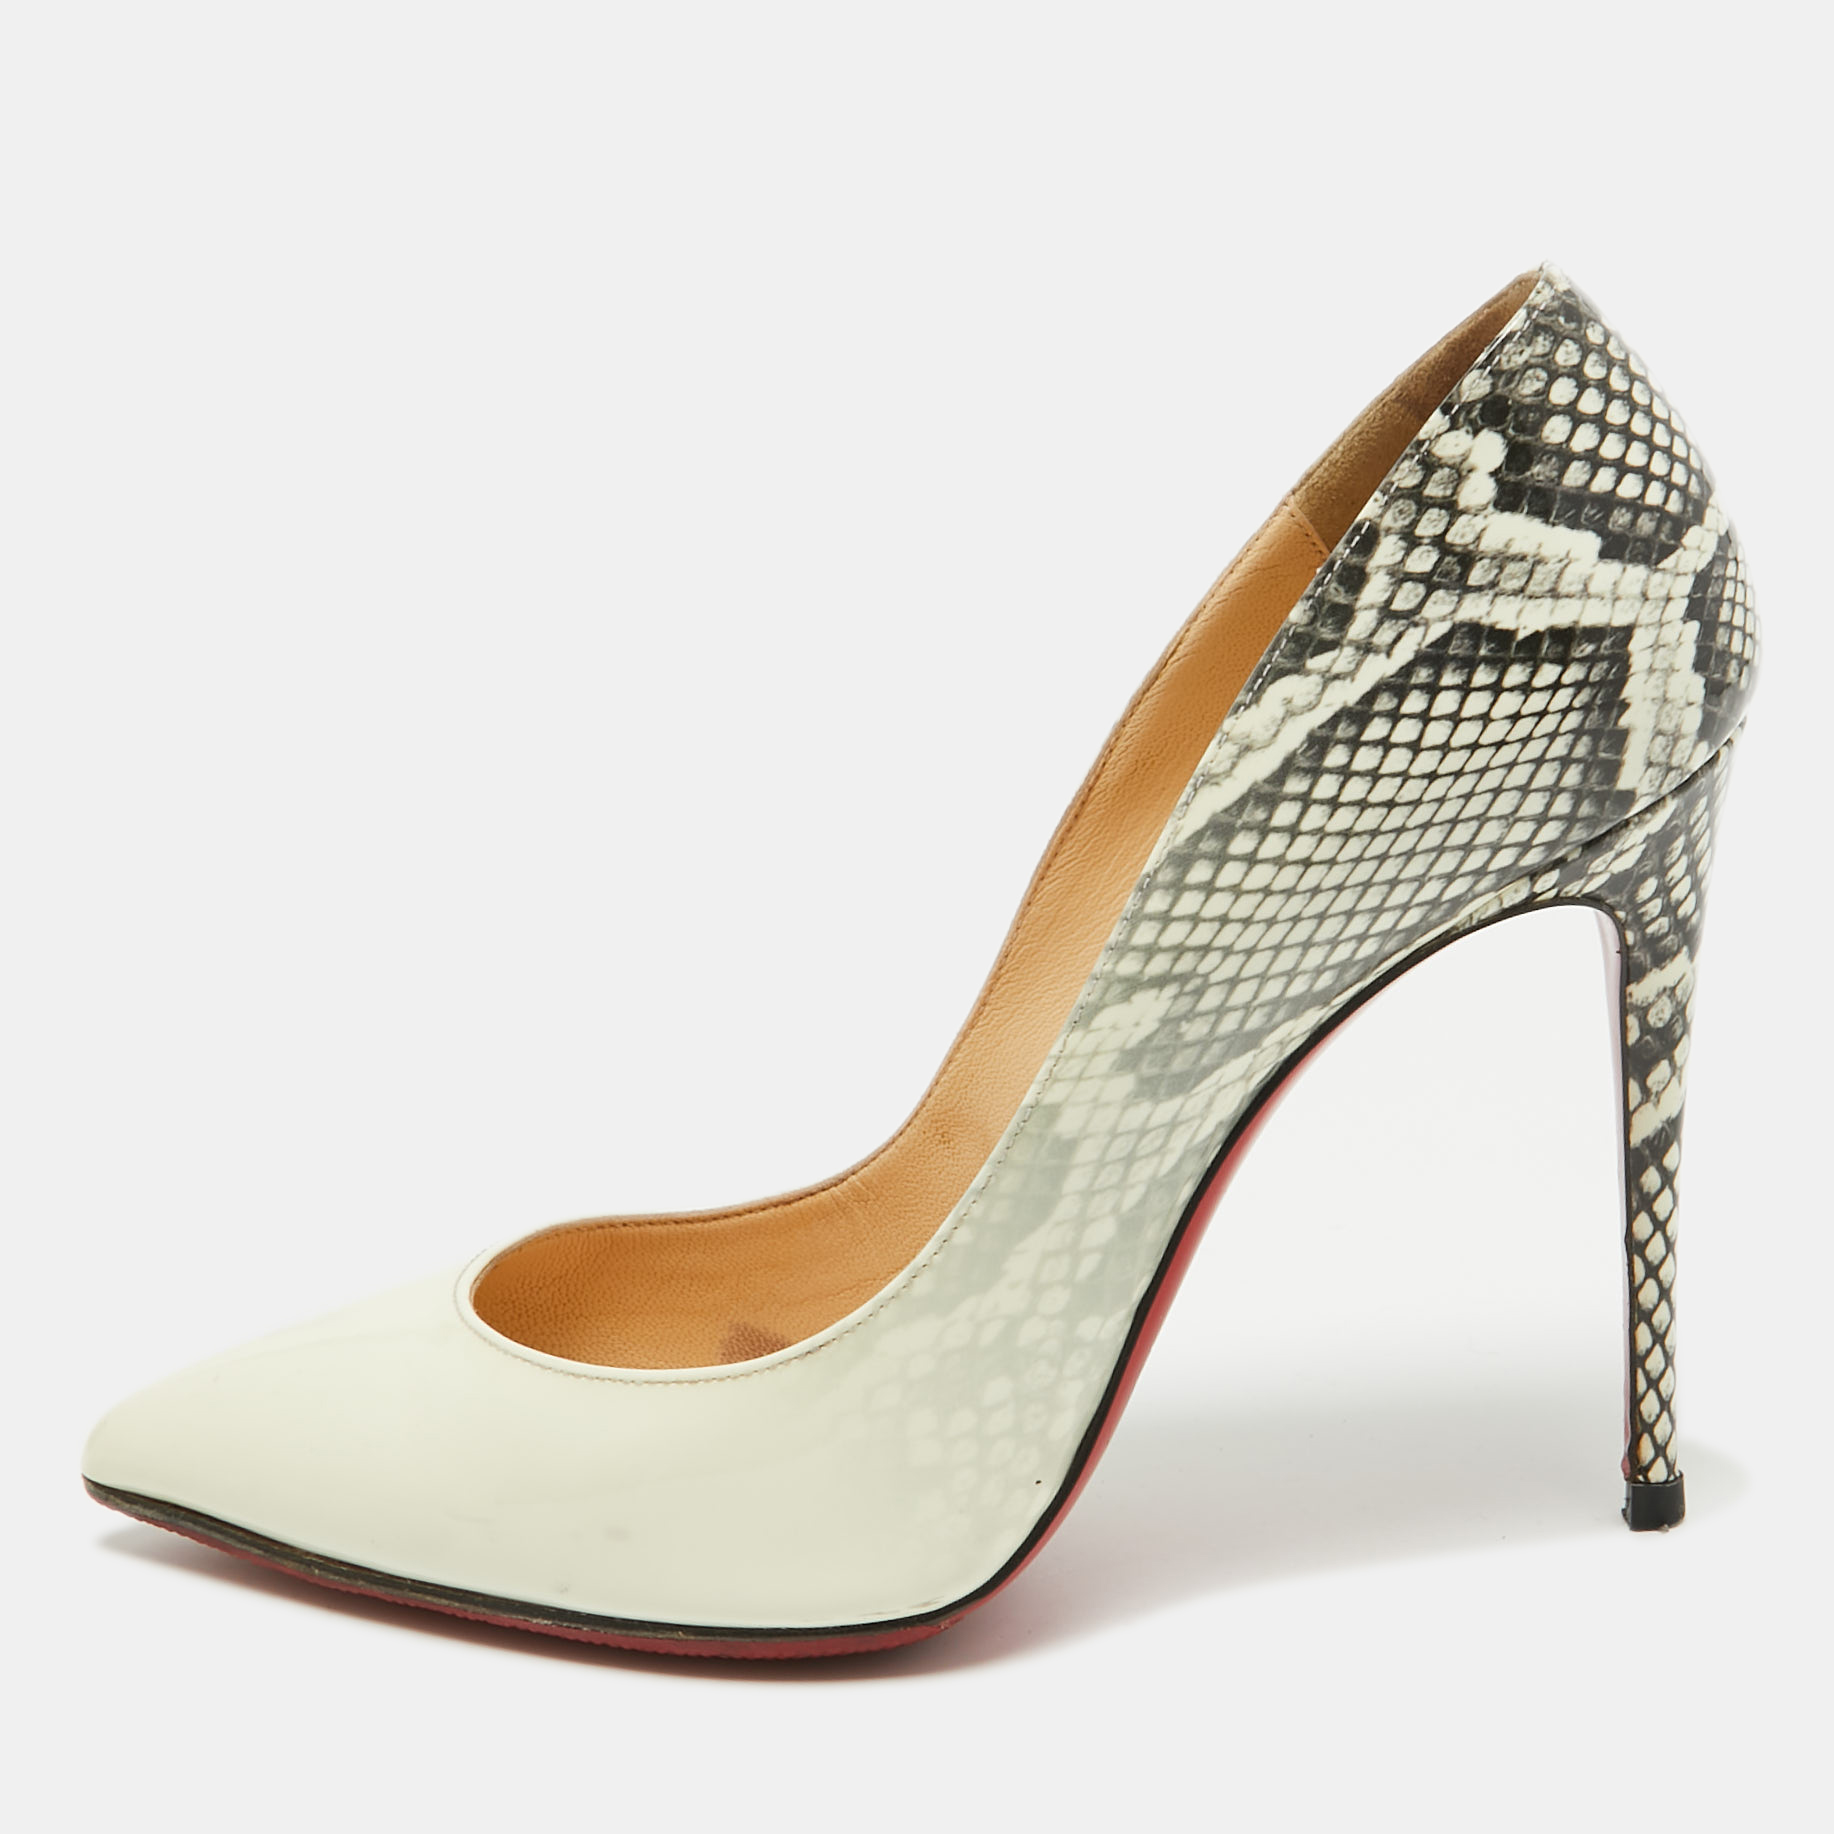 Pre-owned Christian Louboutin Off White/python Prints Patent Leather Pigalle Follies Pumps Size 37.5